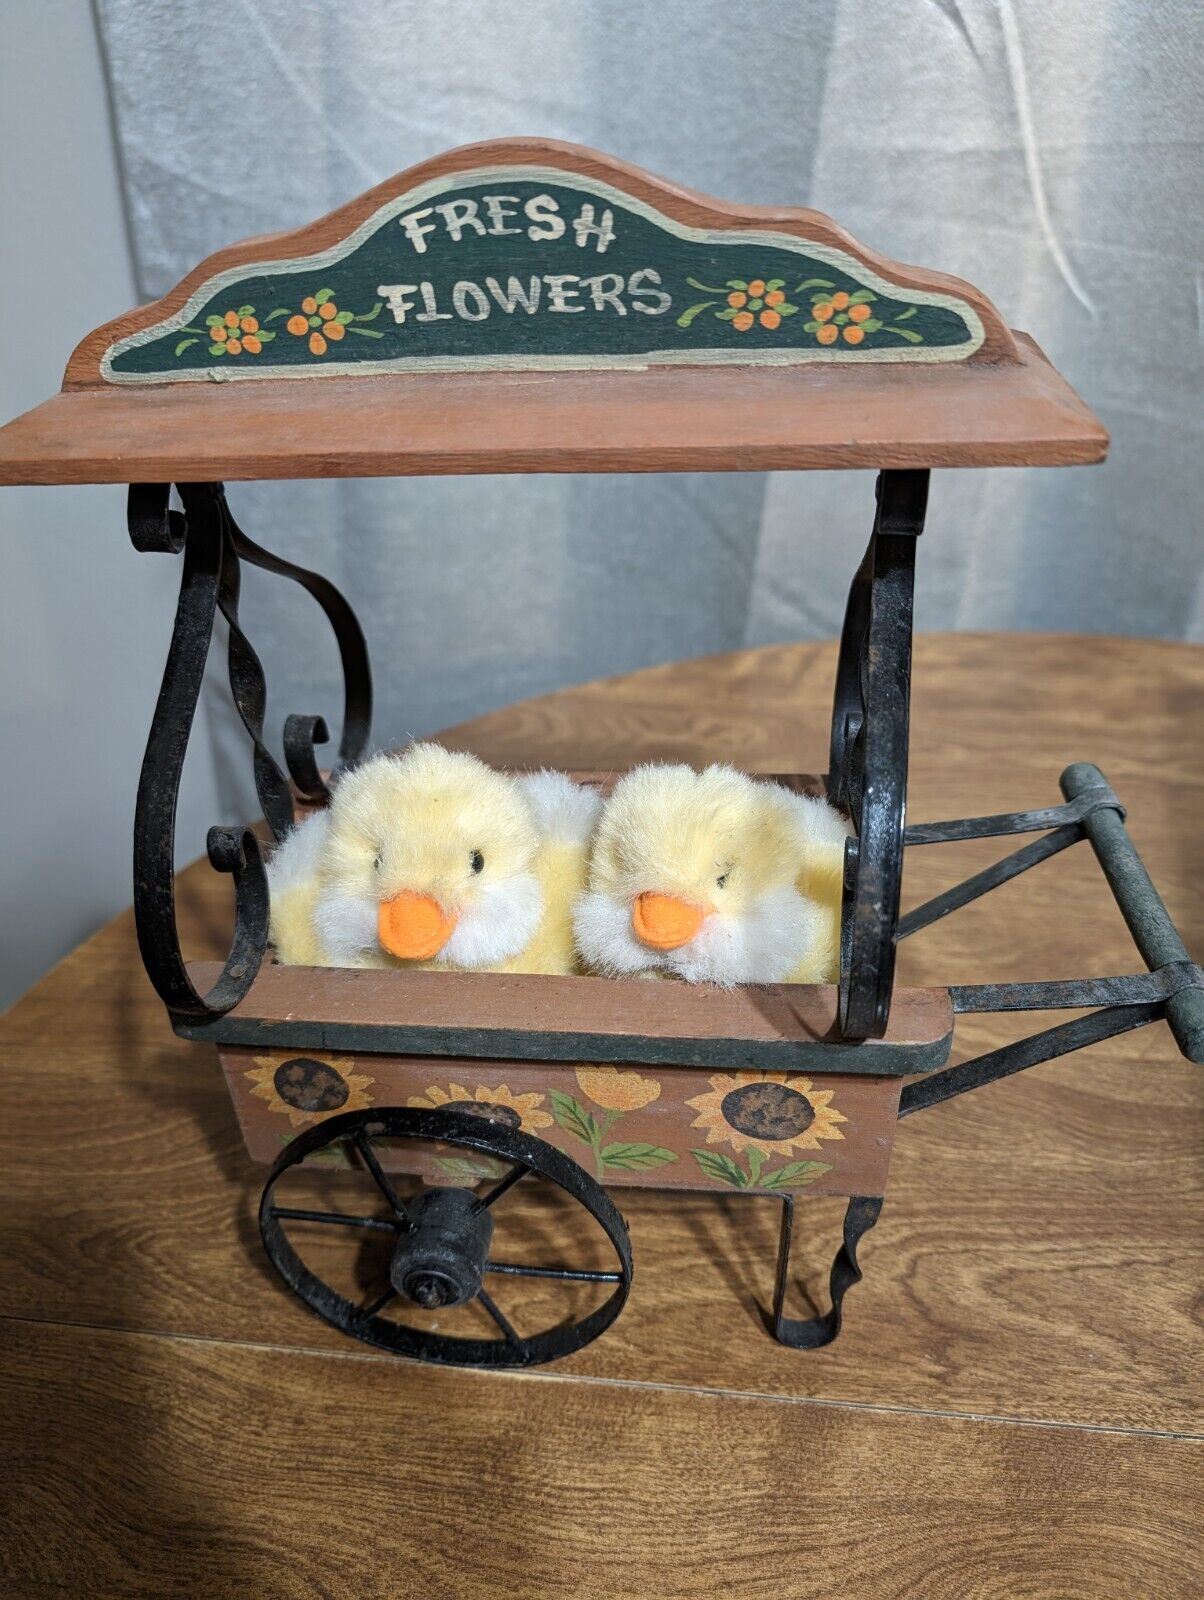 Springtime Delight: Adorable Easter Chicks in a Flower Wagon